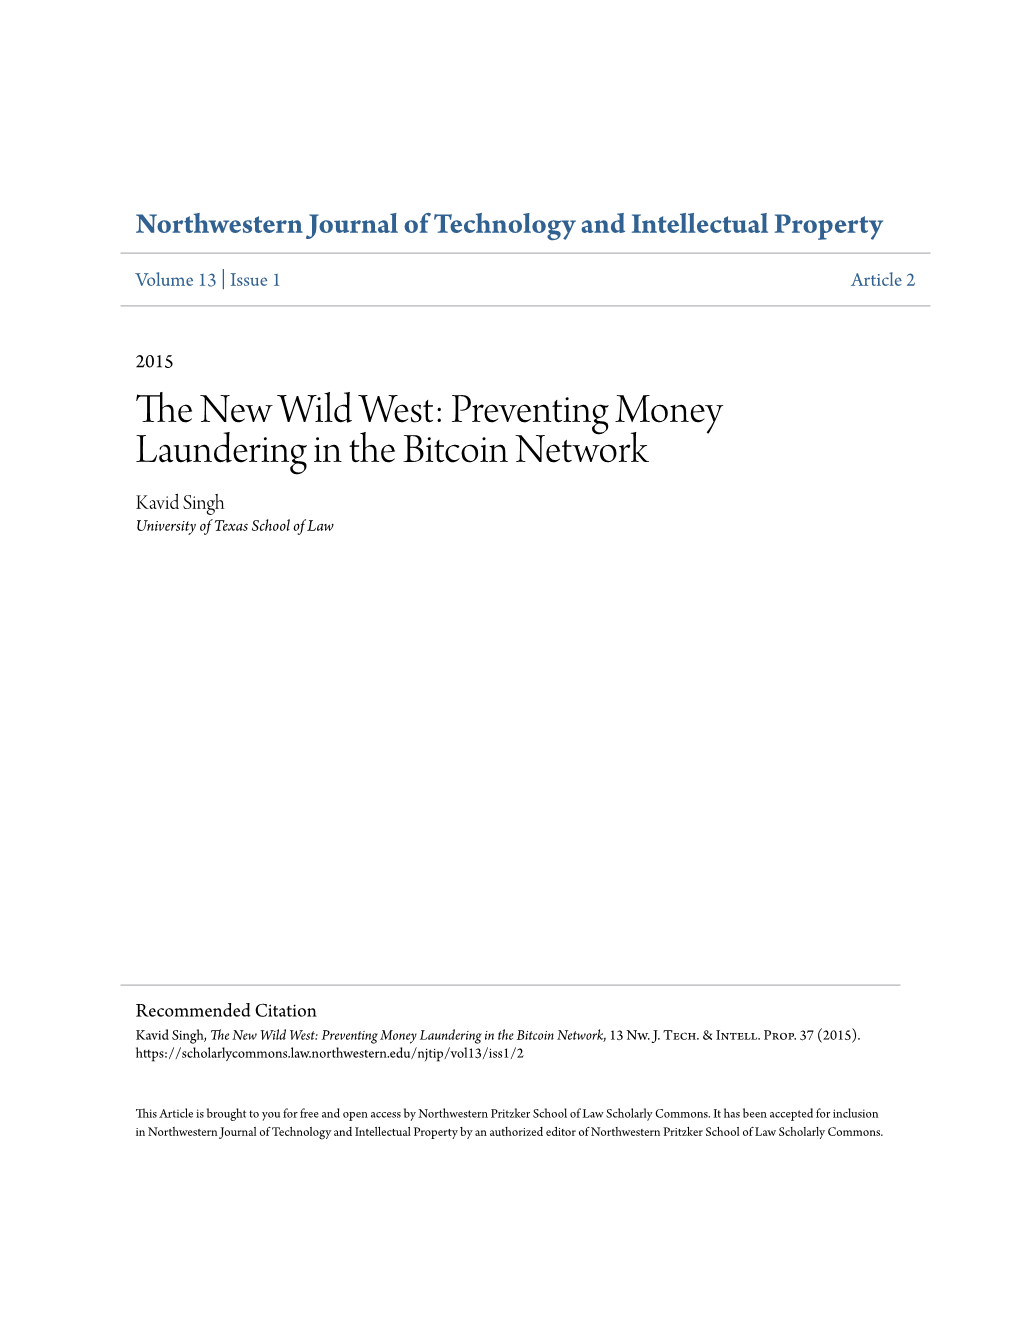 The New Wild West: Preventing Money Laundering in the Bitcoin Network, 13 Nw